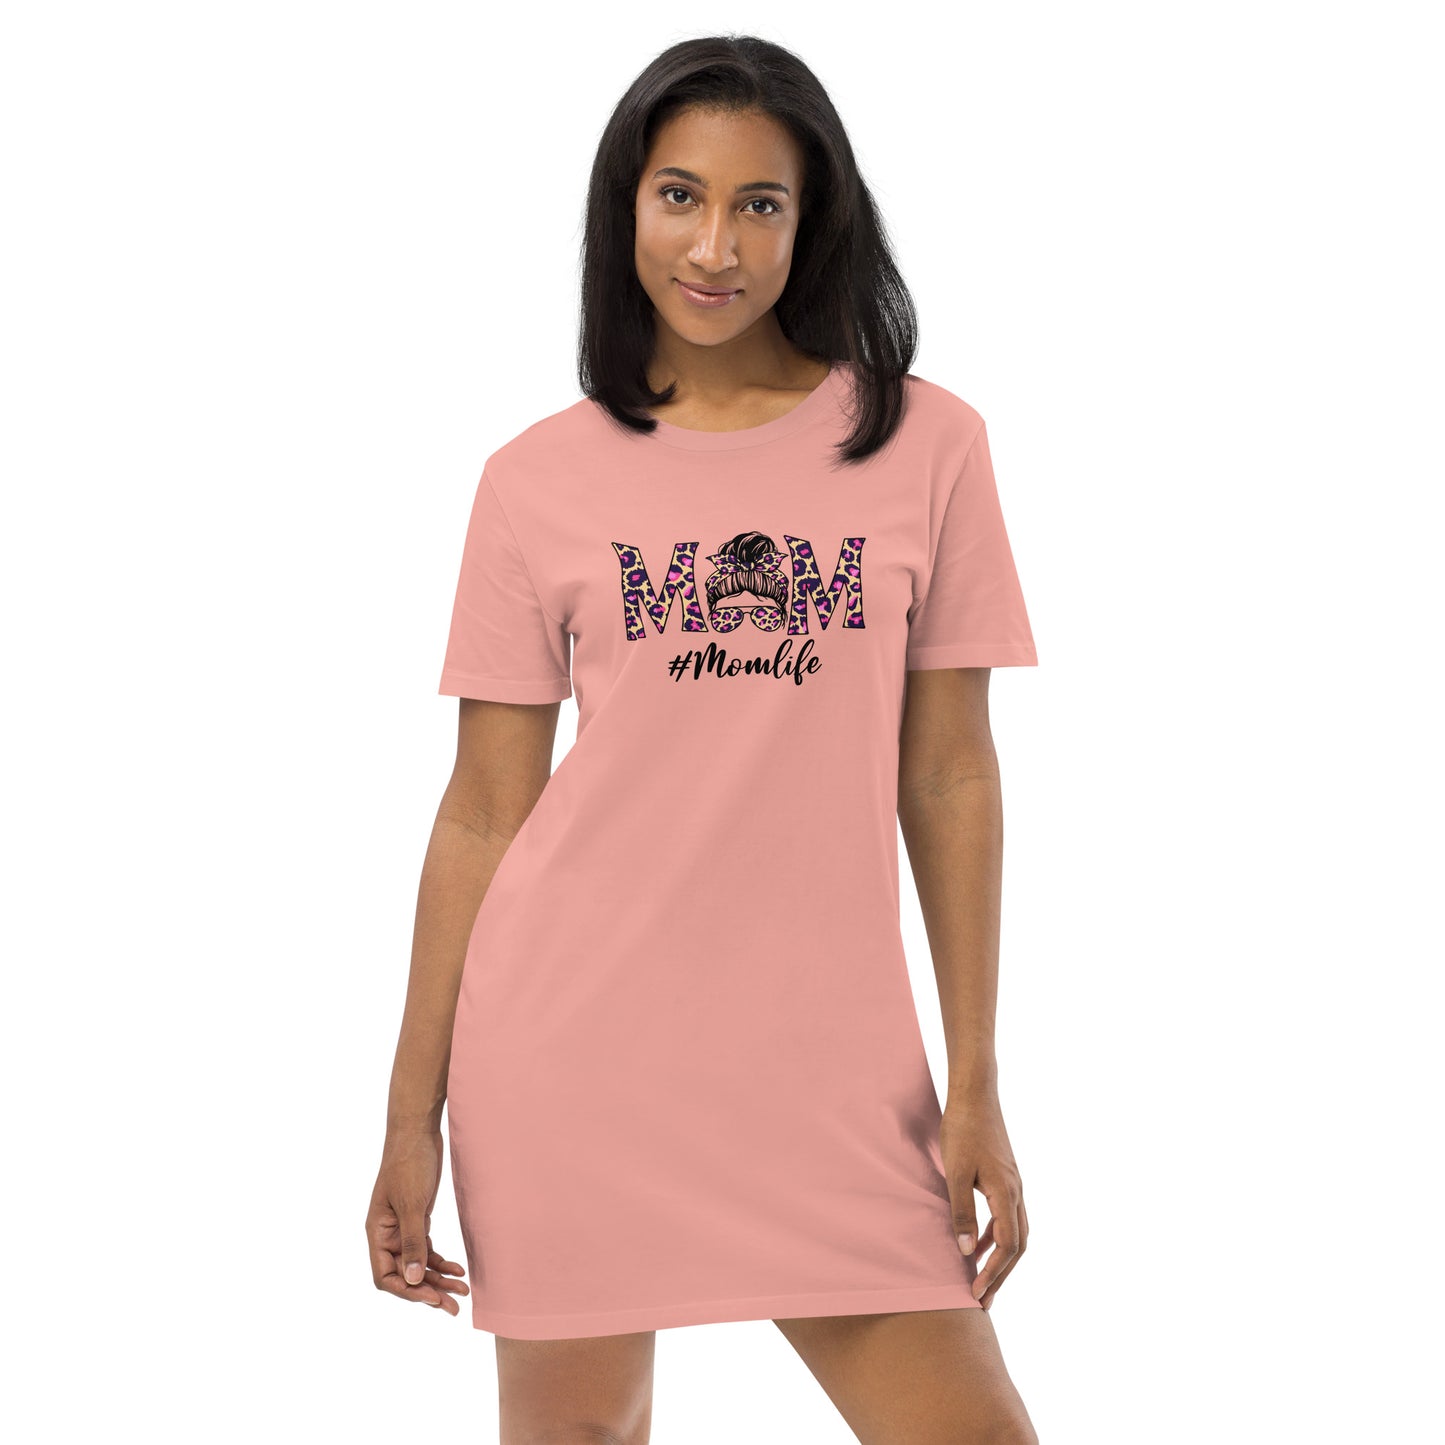 The super gift for Mothersday. Comfy organic cotton T-shirt dress in pink for the best mom.